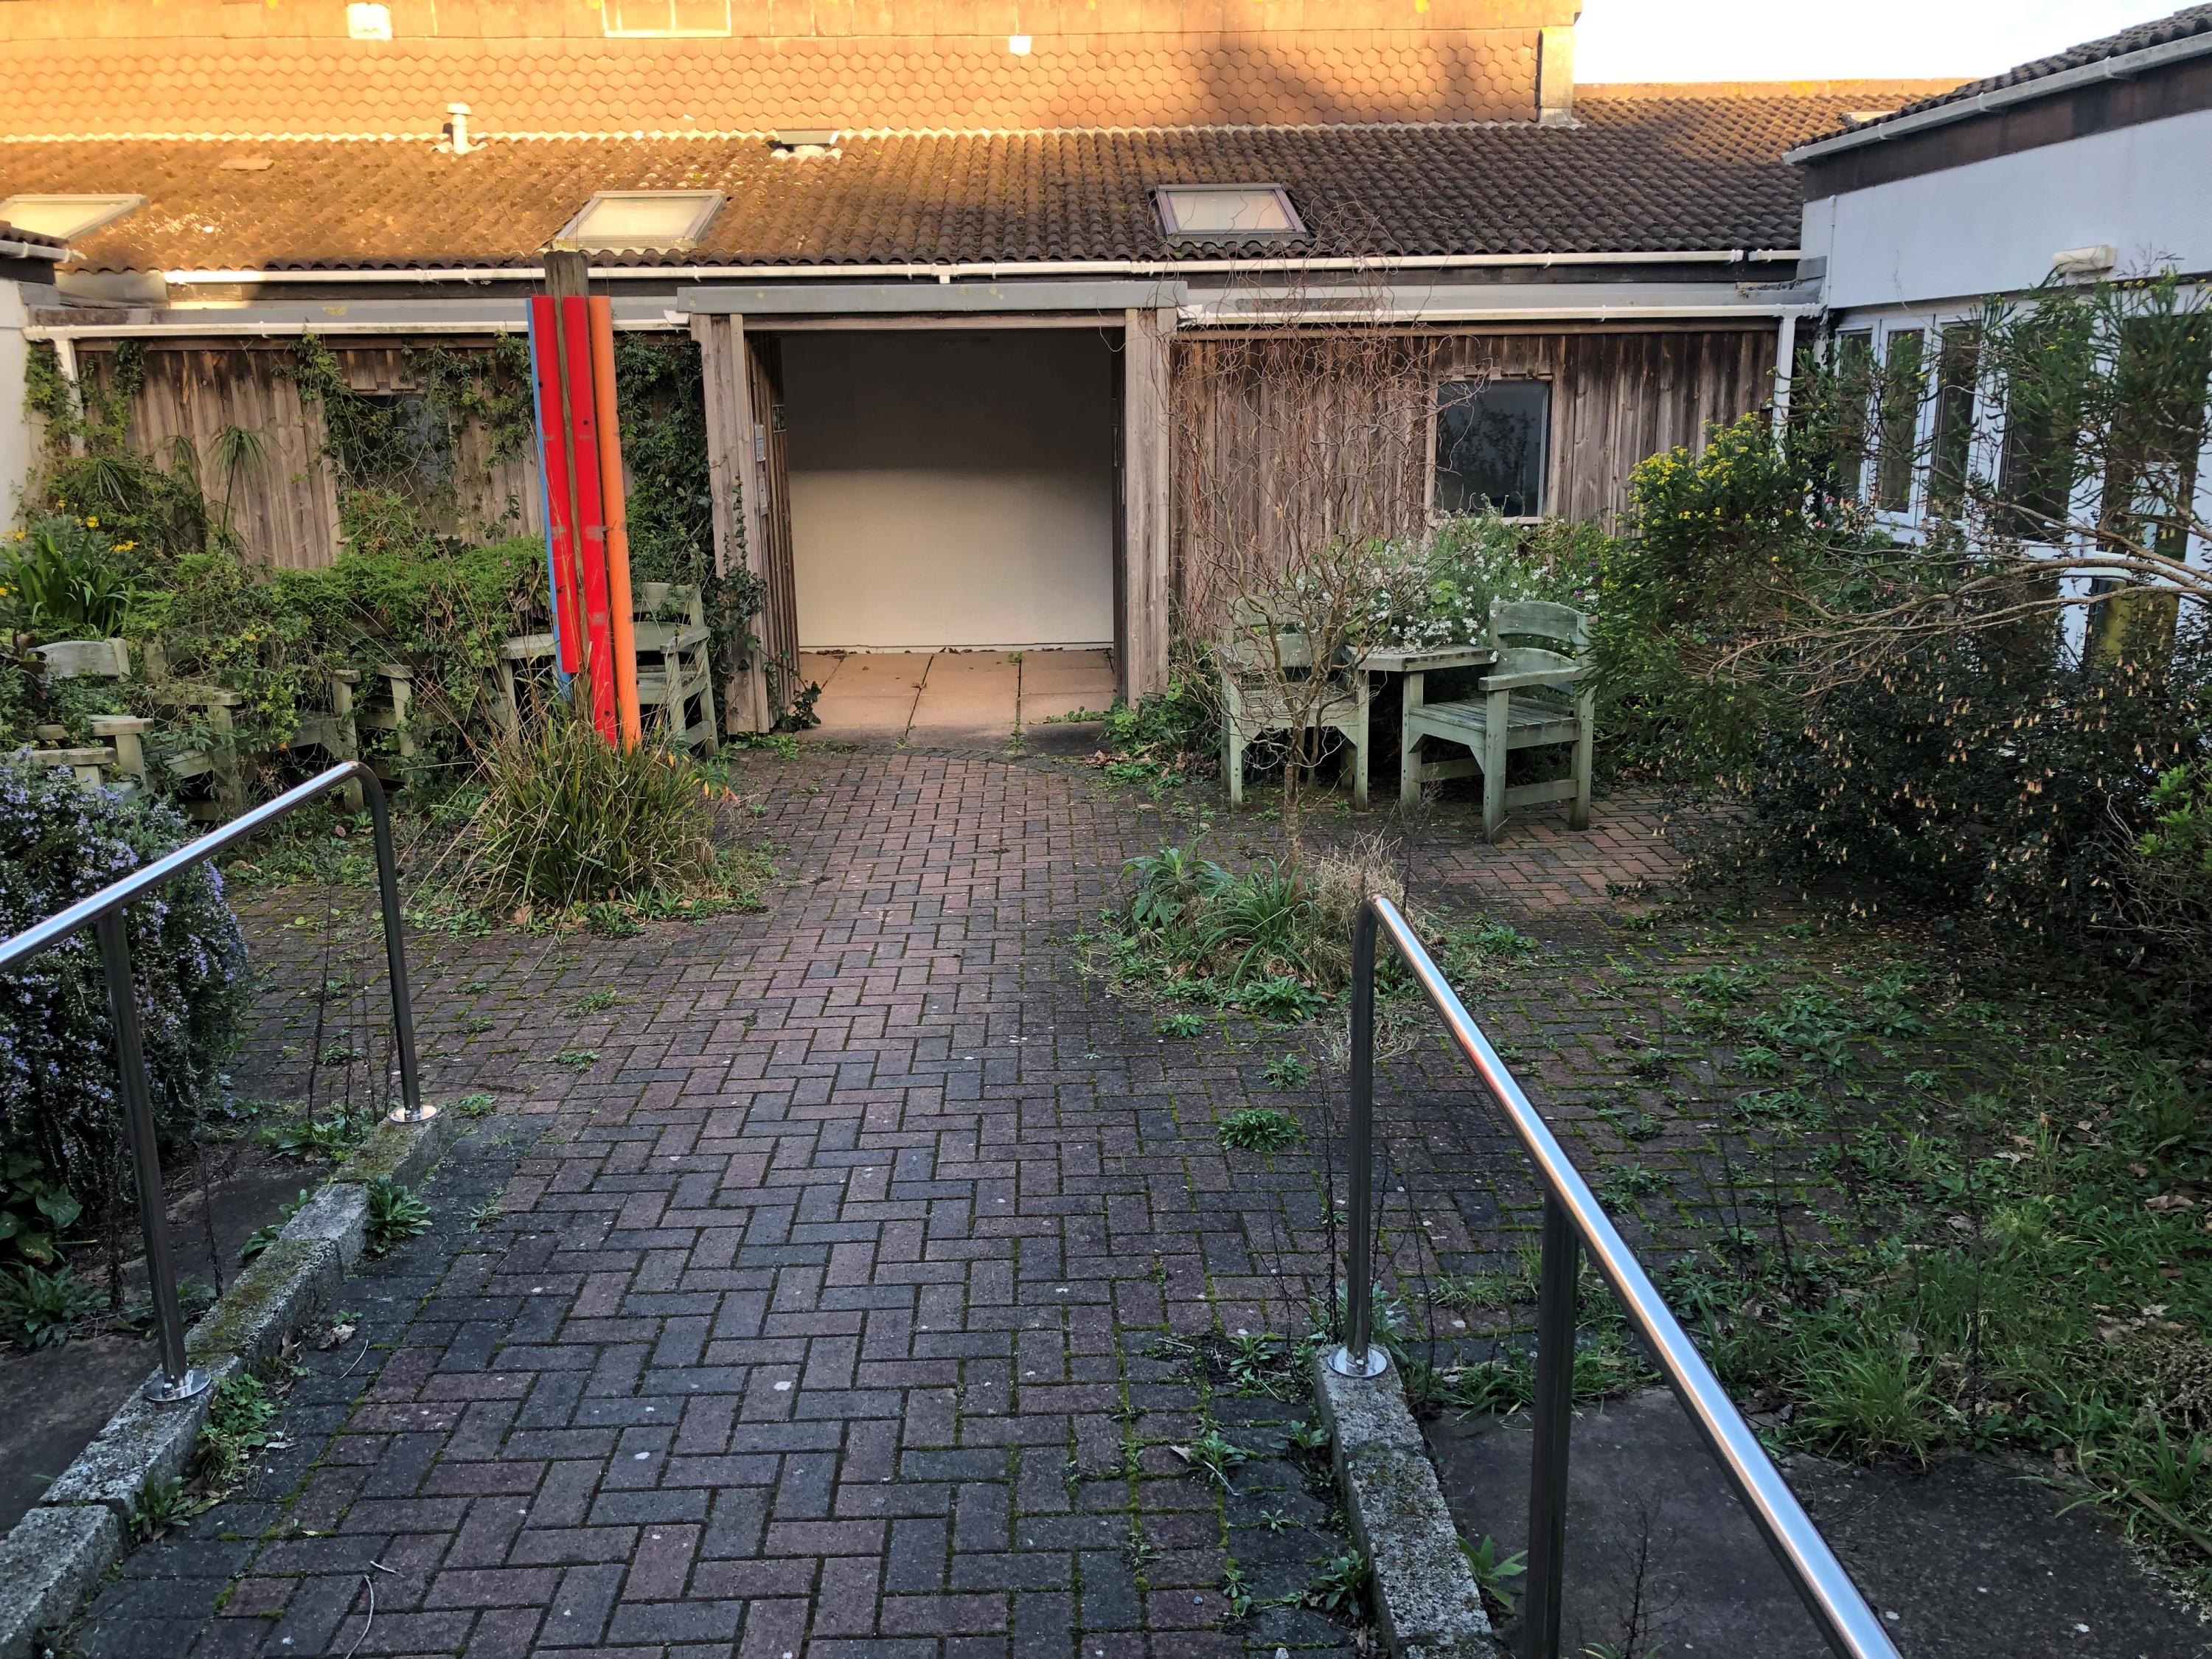 Photograph of the courtyard area at the Carn Gwaval Wellbeing Centre prior to work being undertaken on the garden